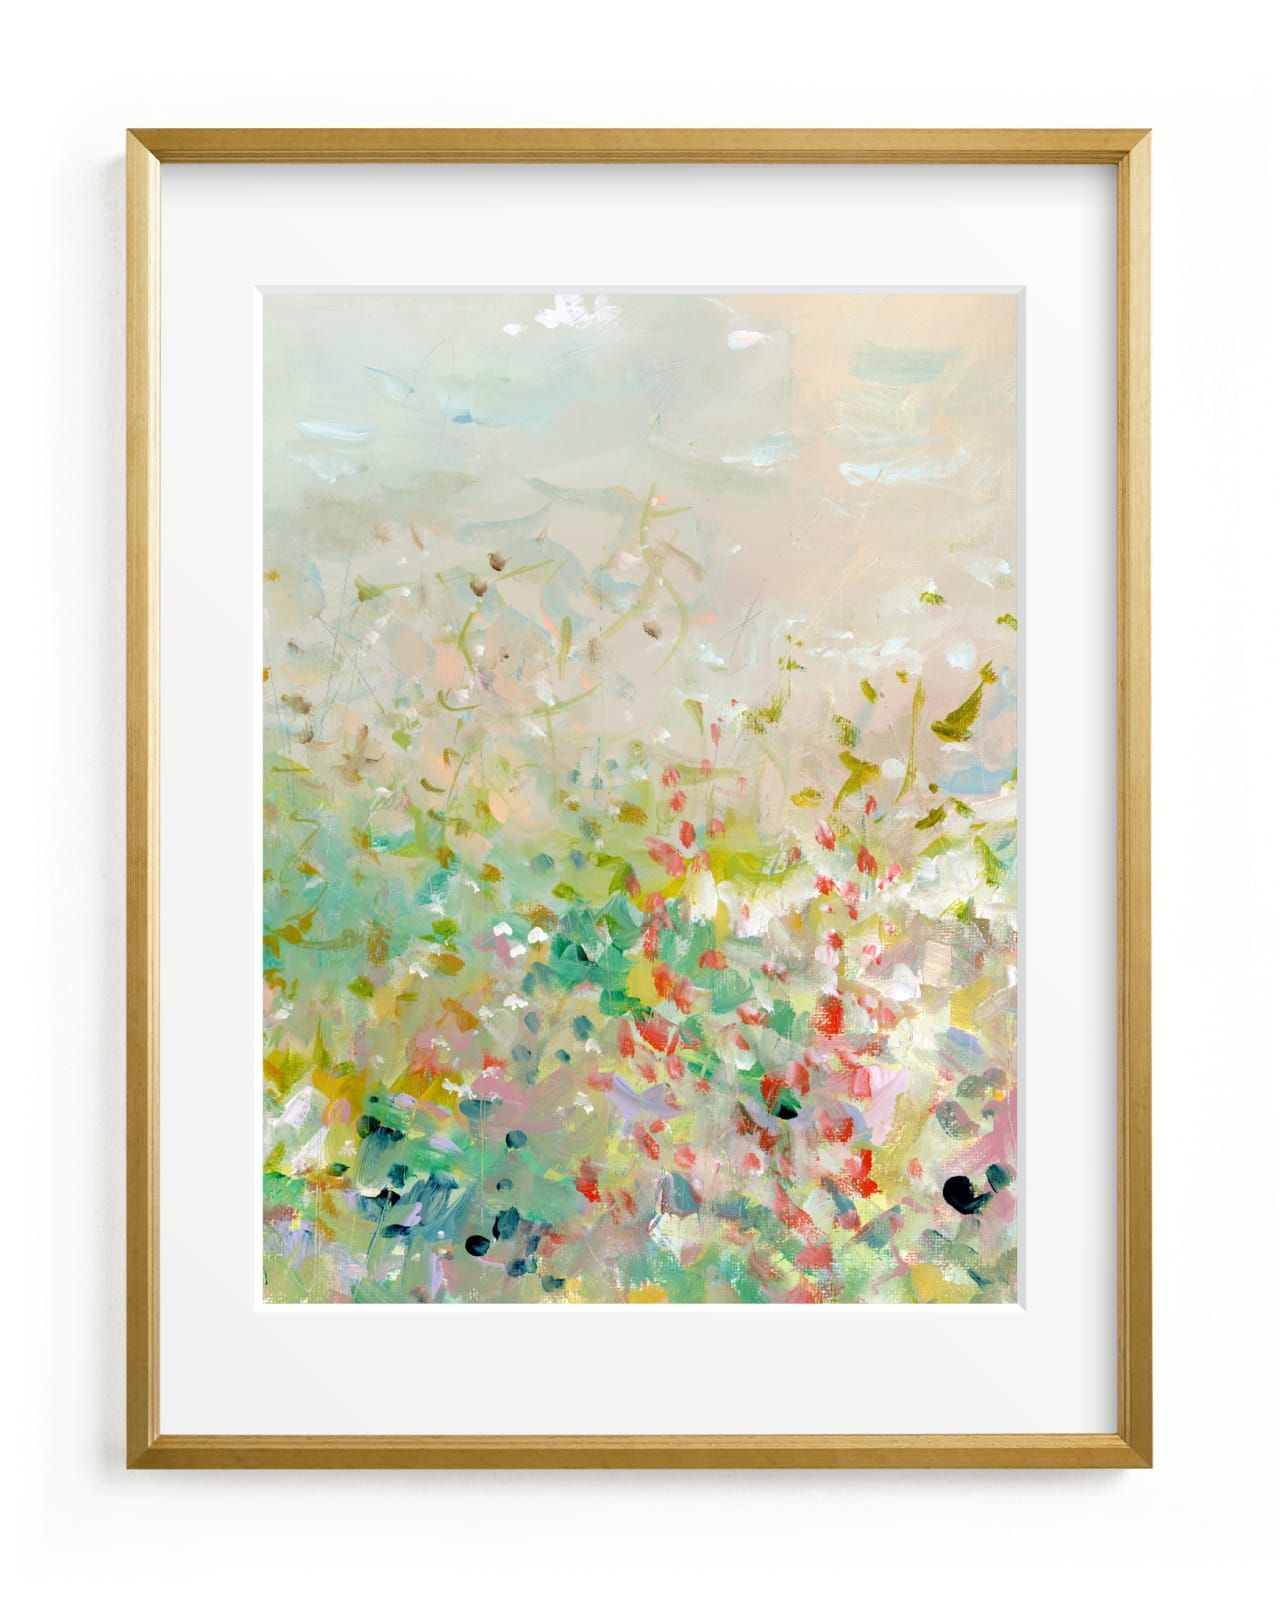 "English Garden II" - Painting Limited Edition Art Print by Lindsay Megahed. | Minted